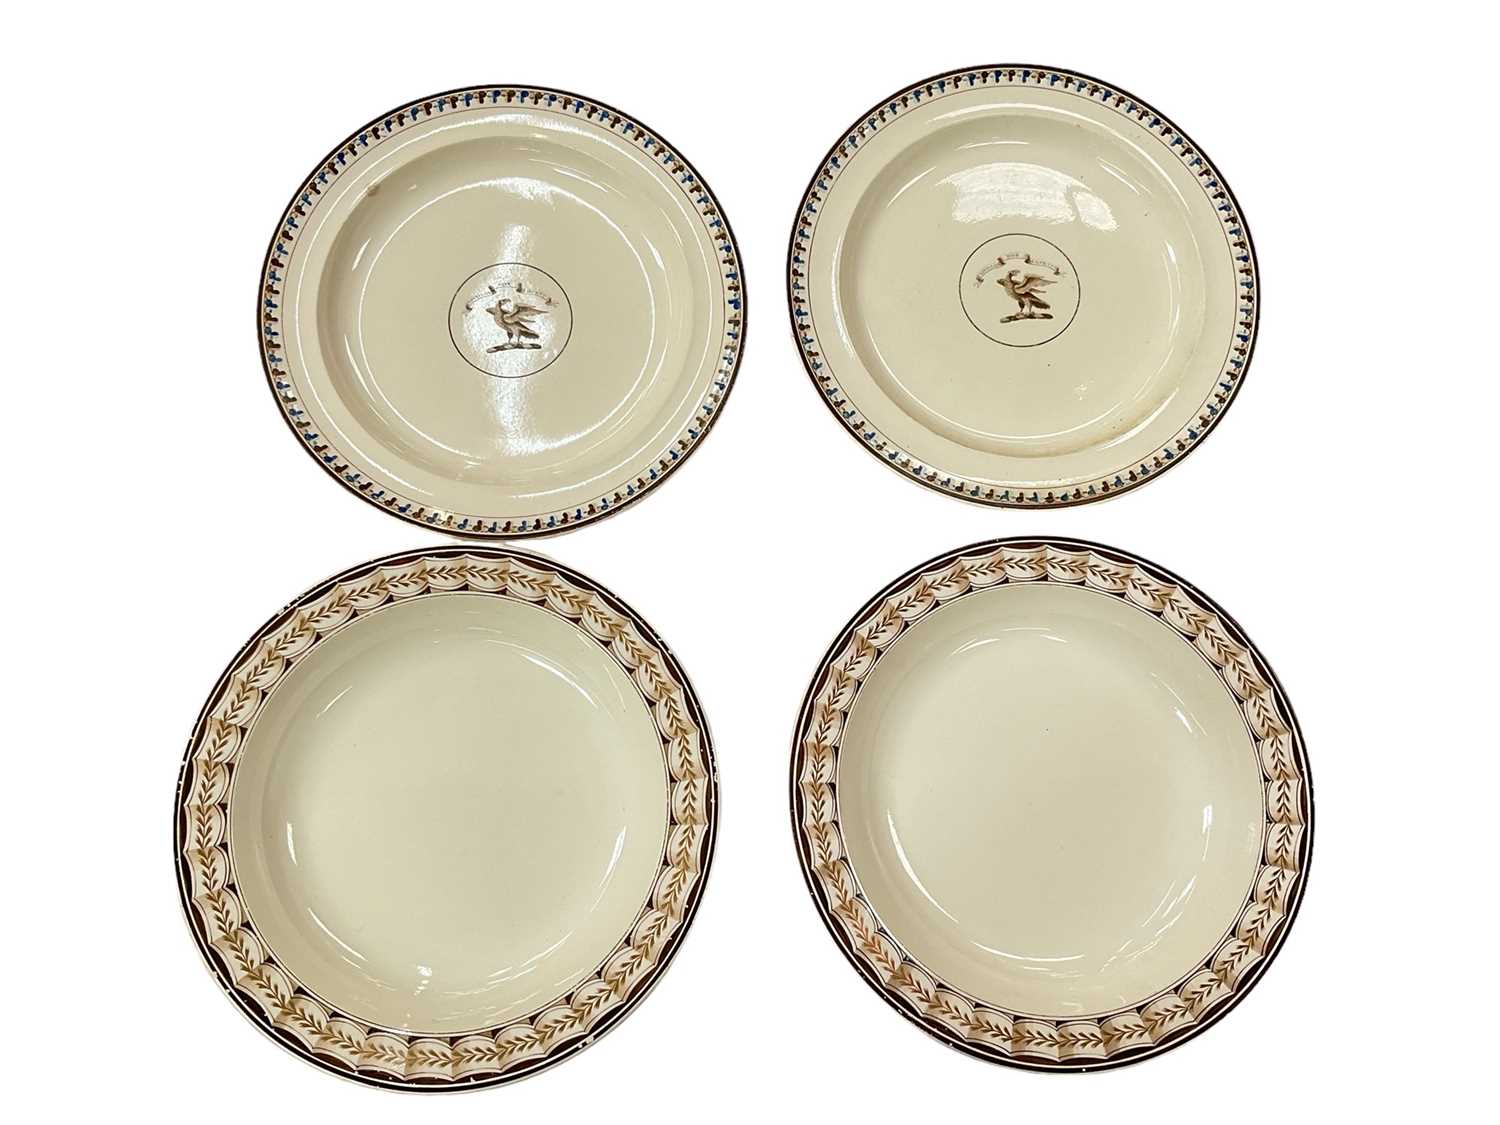 Lot 79 - Pair of Wedgwood Queensware crested plates and another pair of plates